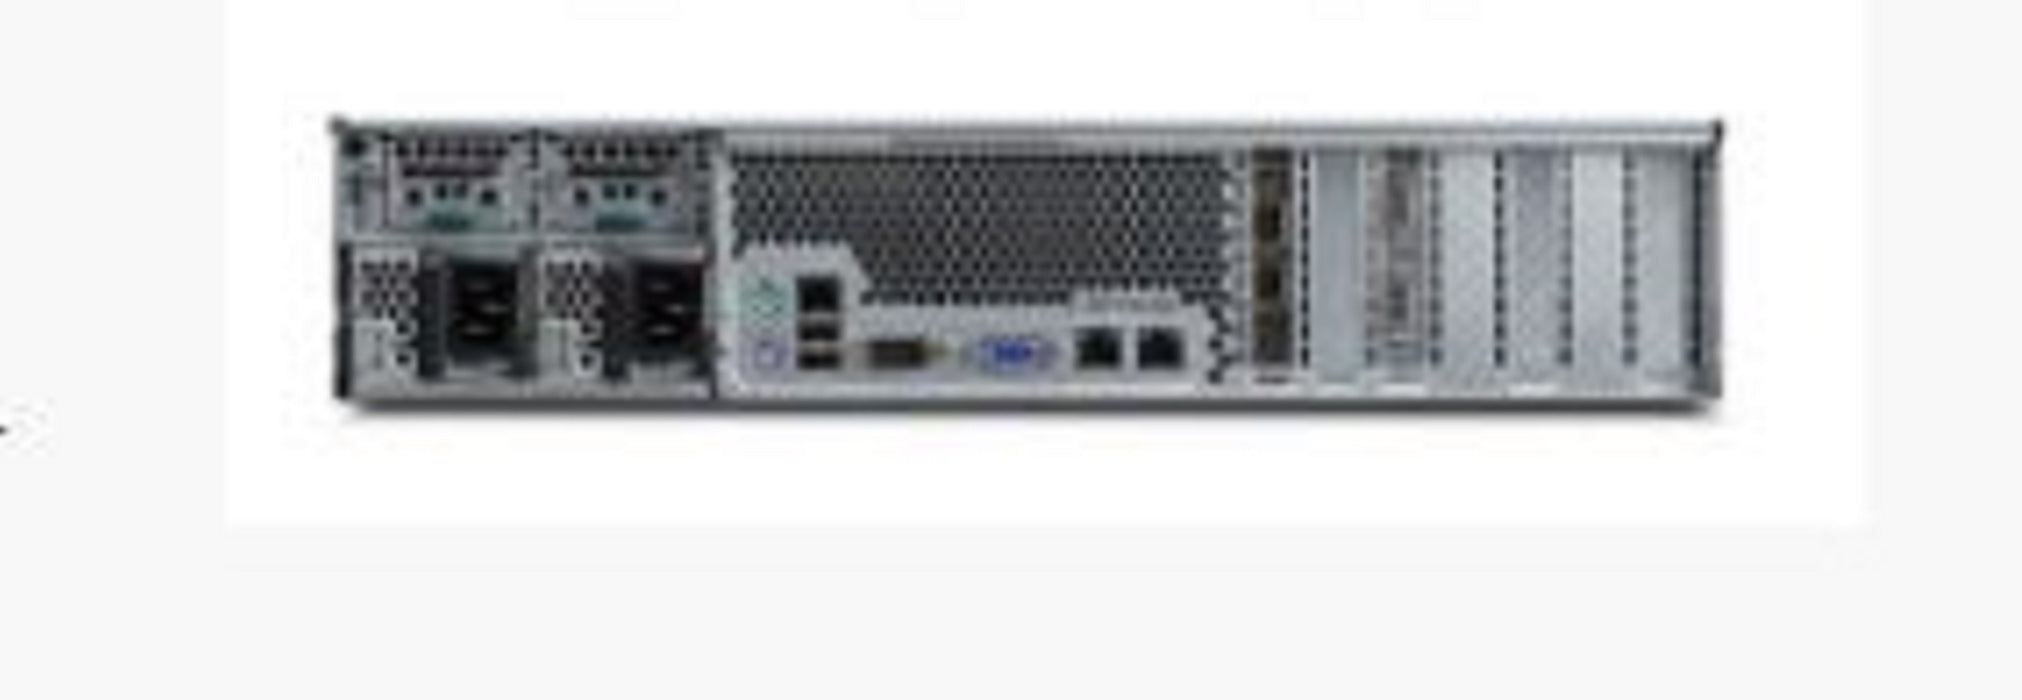 Isilon X200 168TB 7-Node Cluster with 2 x 8-Port Infiniband switches